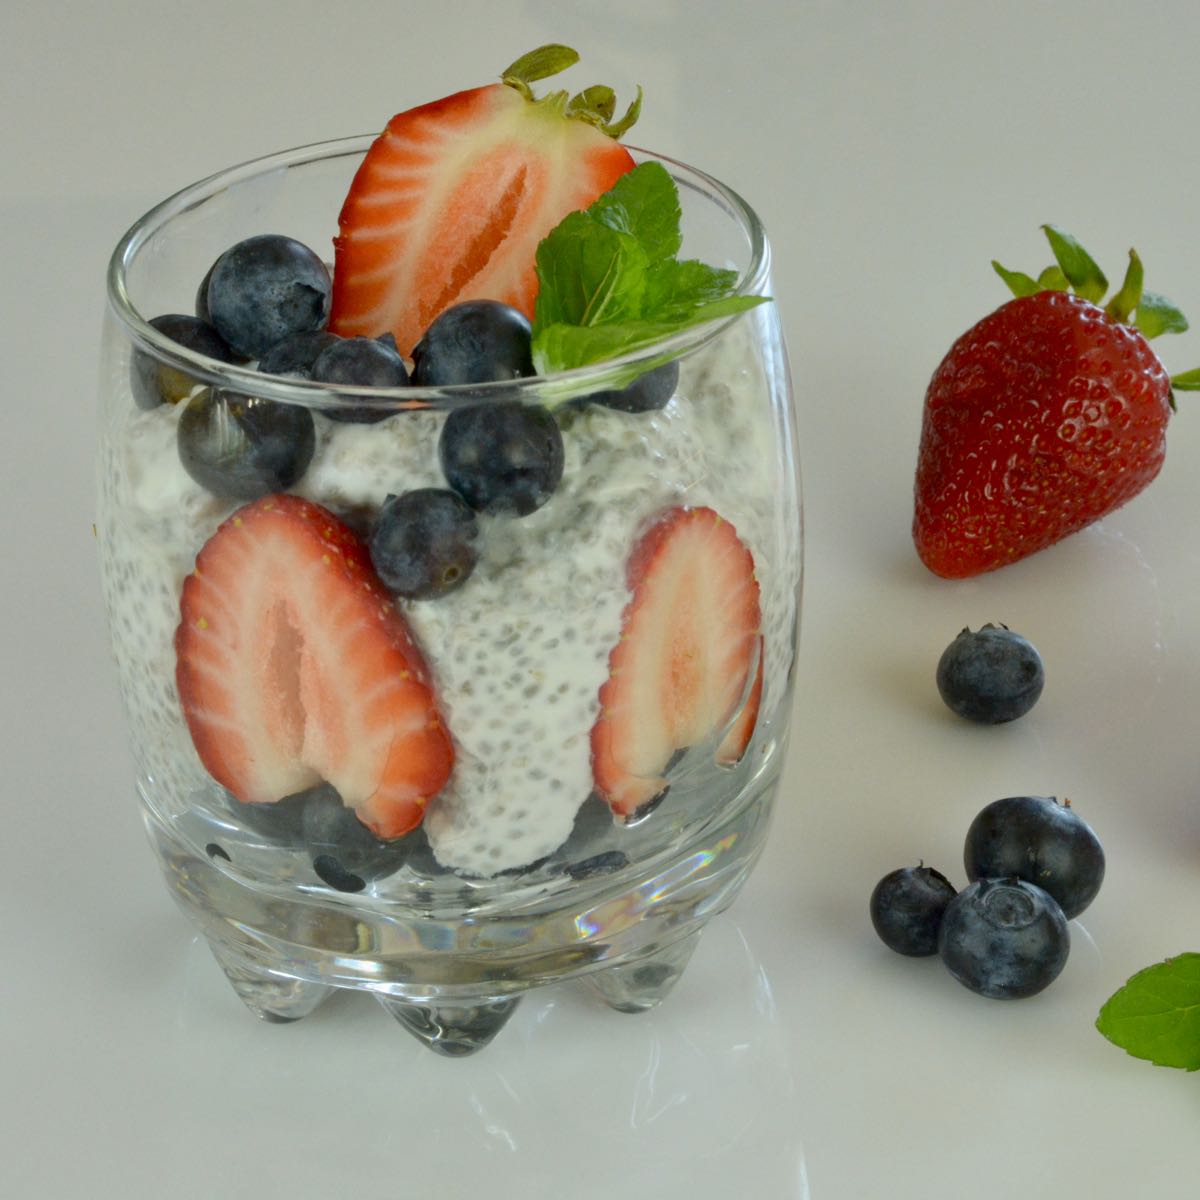 A glass of Chia Pudding with strawberries and blueberries.